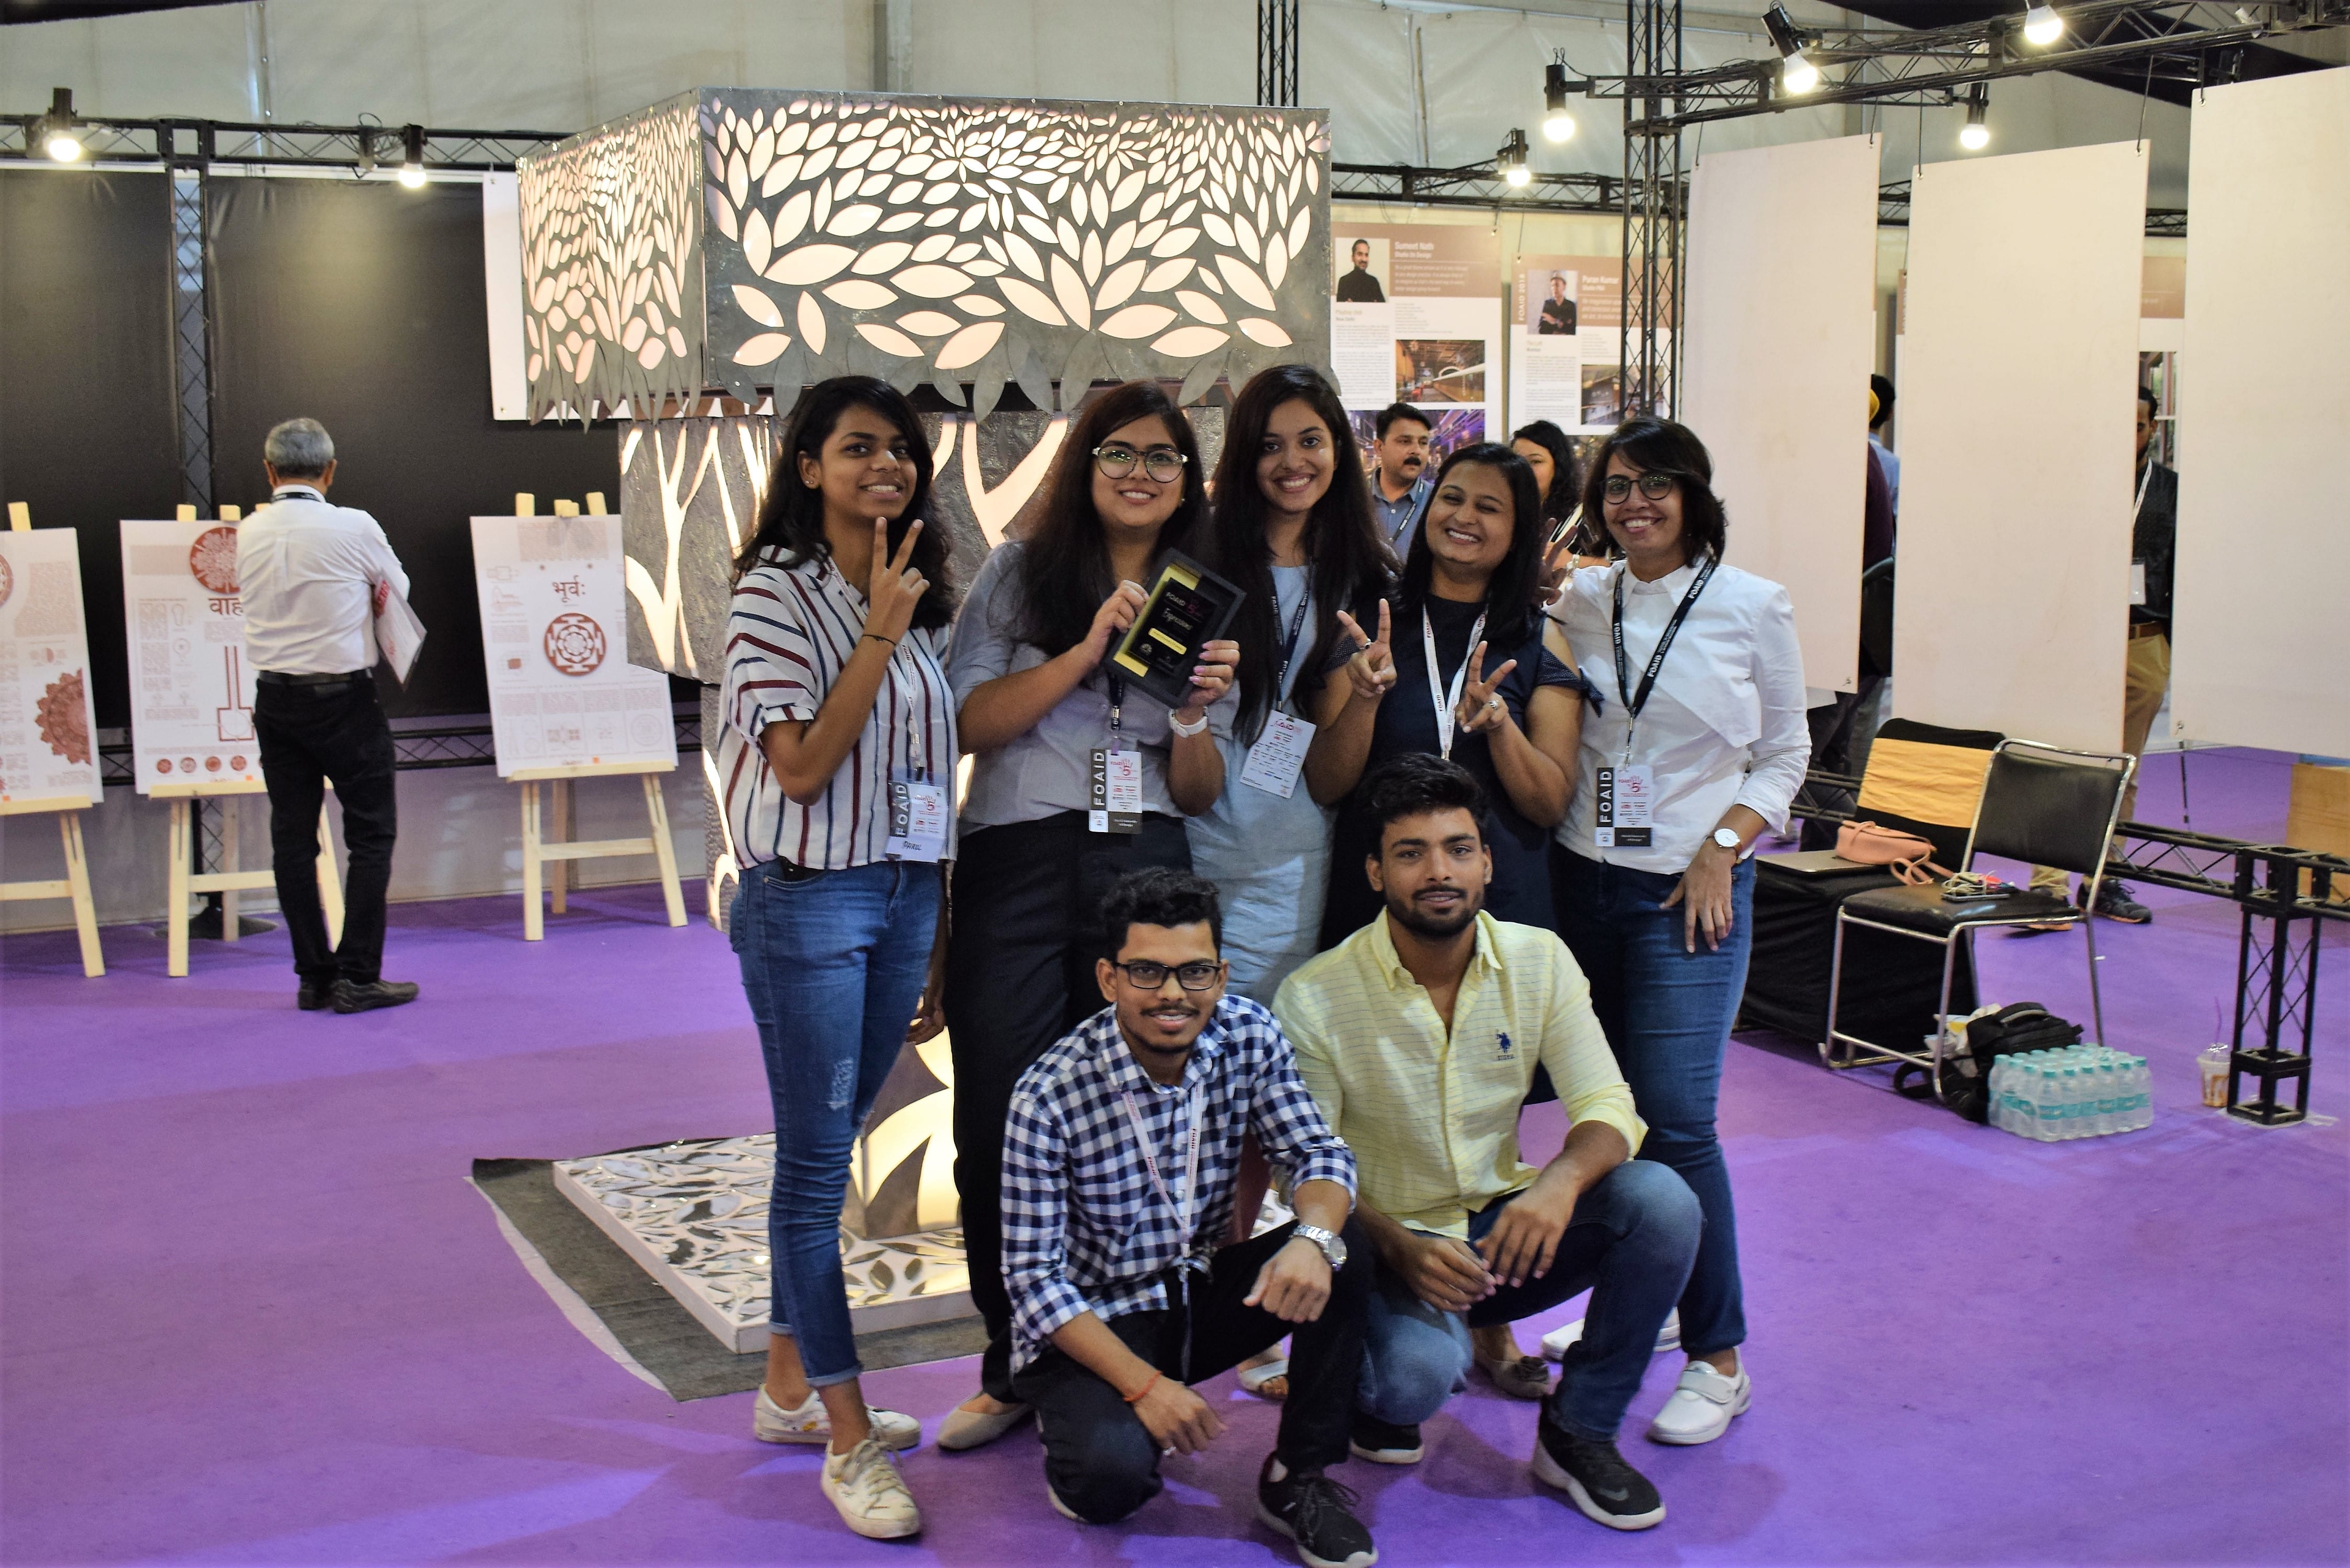 WUD students shine at 'Expressions' art competition at FOAID 2018